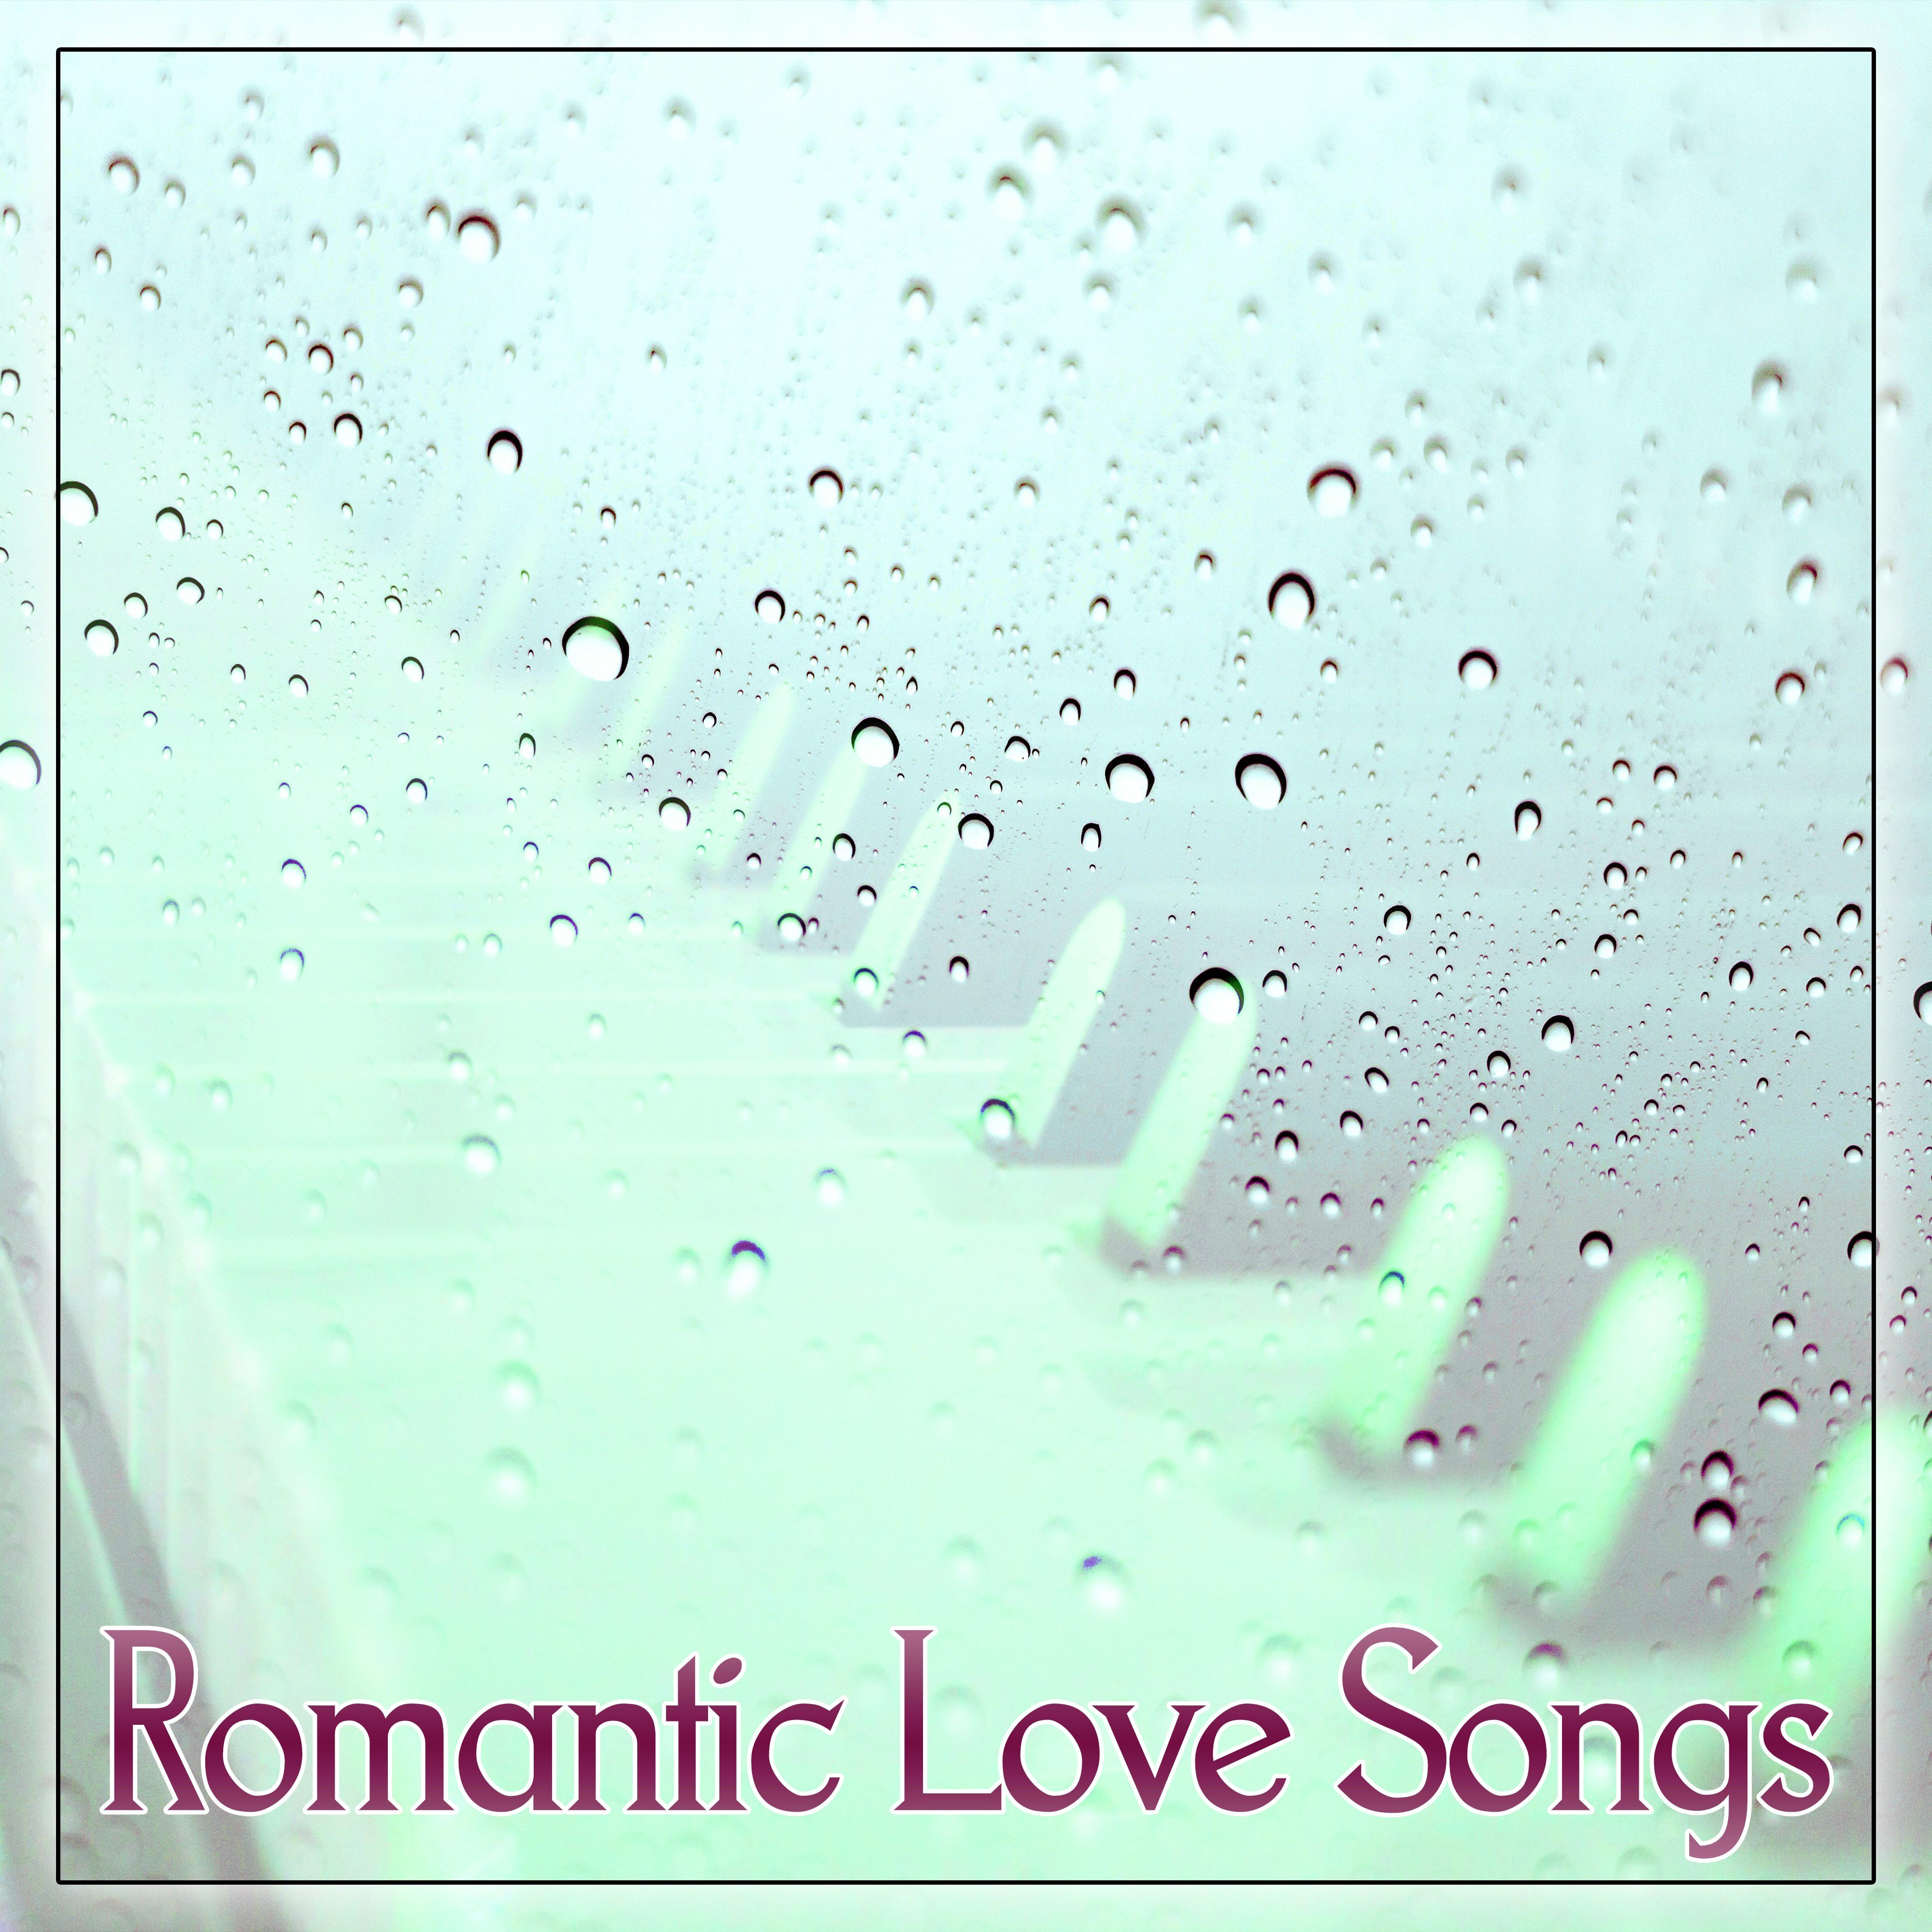 Romantic Love Songs  Most  Jazz for Romantic Date, Sensual Background Music for Lovers, Erotic Jazz, Dinner with Candlelight, Romantic Jazz